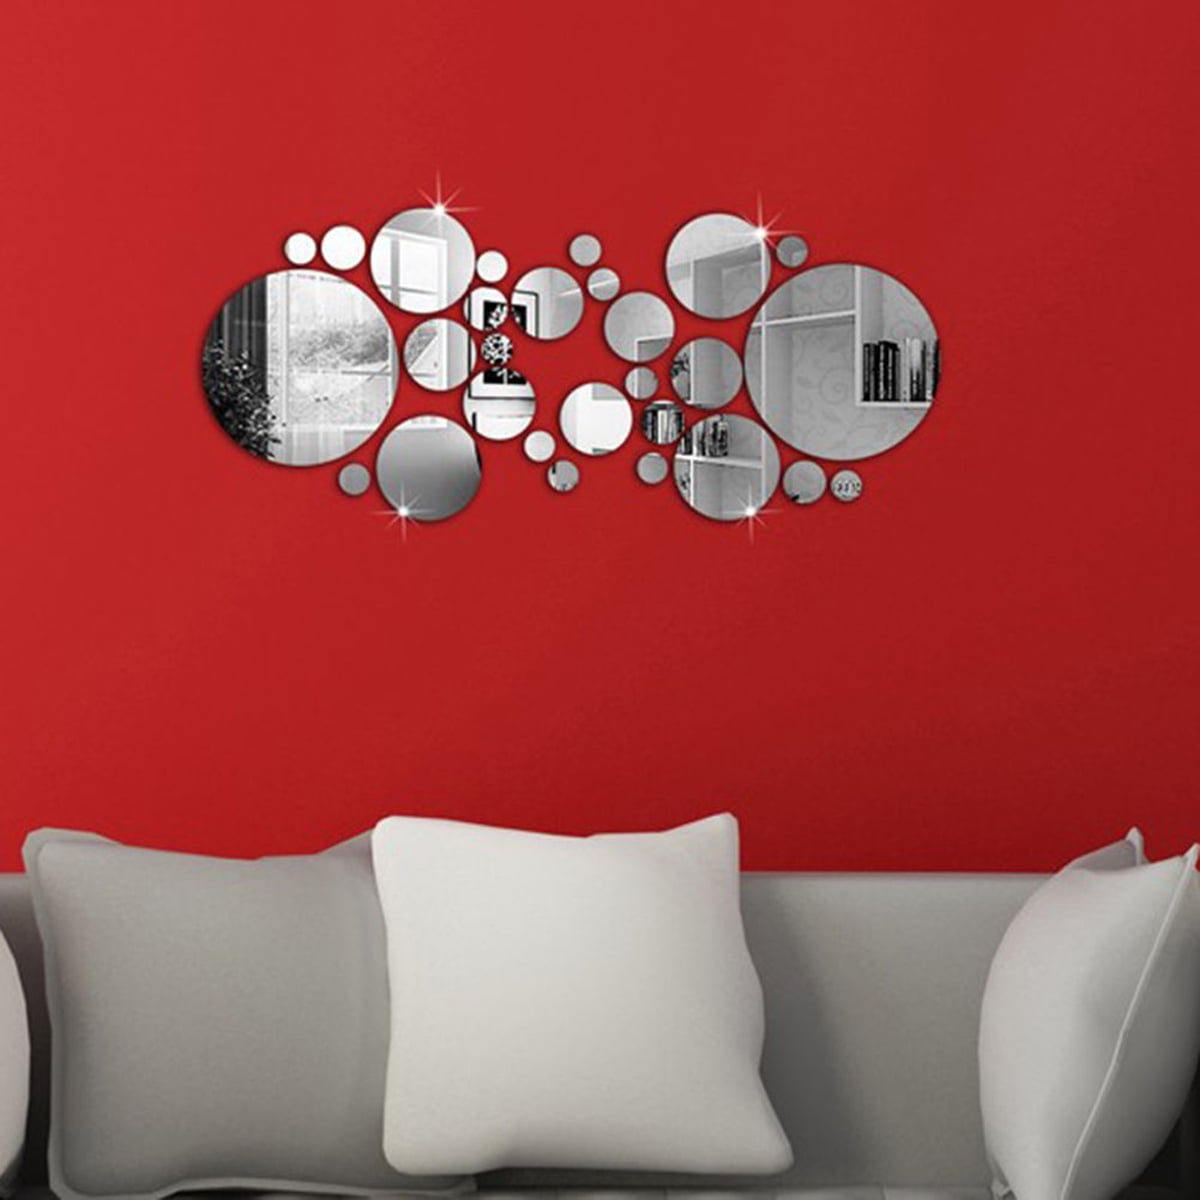 3D Mirror Wall Sticker,Removable Decal Acrylic Art Mural Room Home-Decor Gift